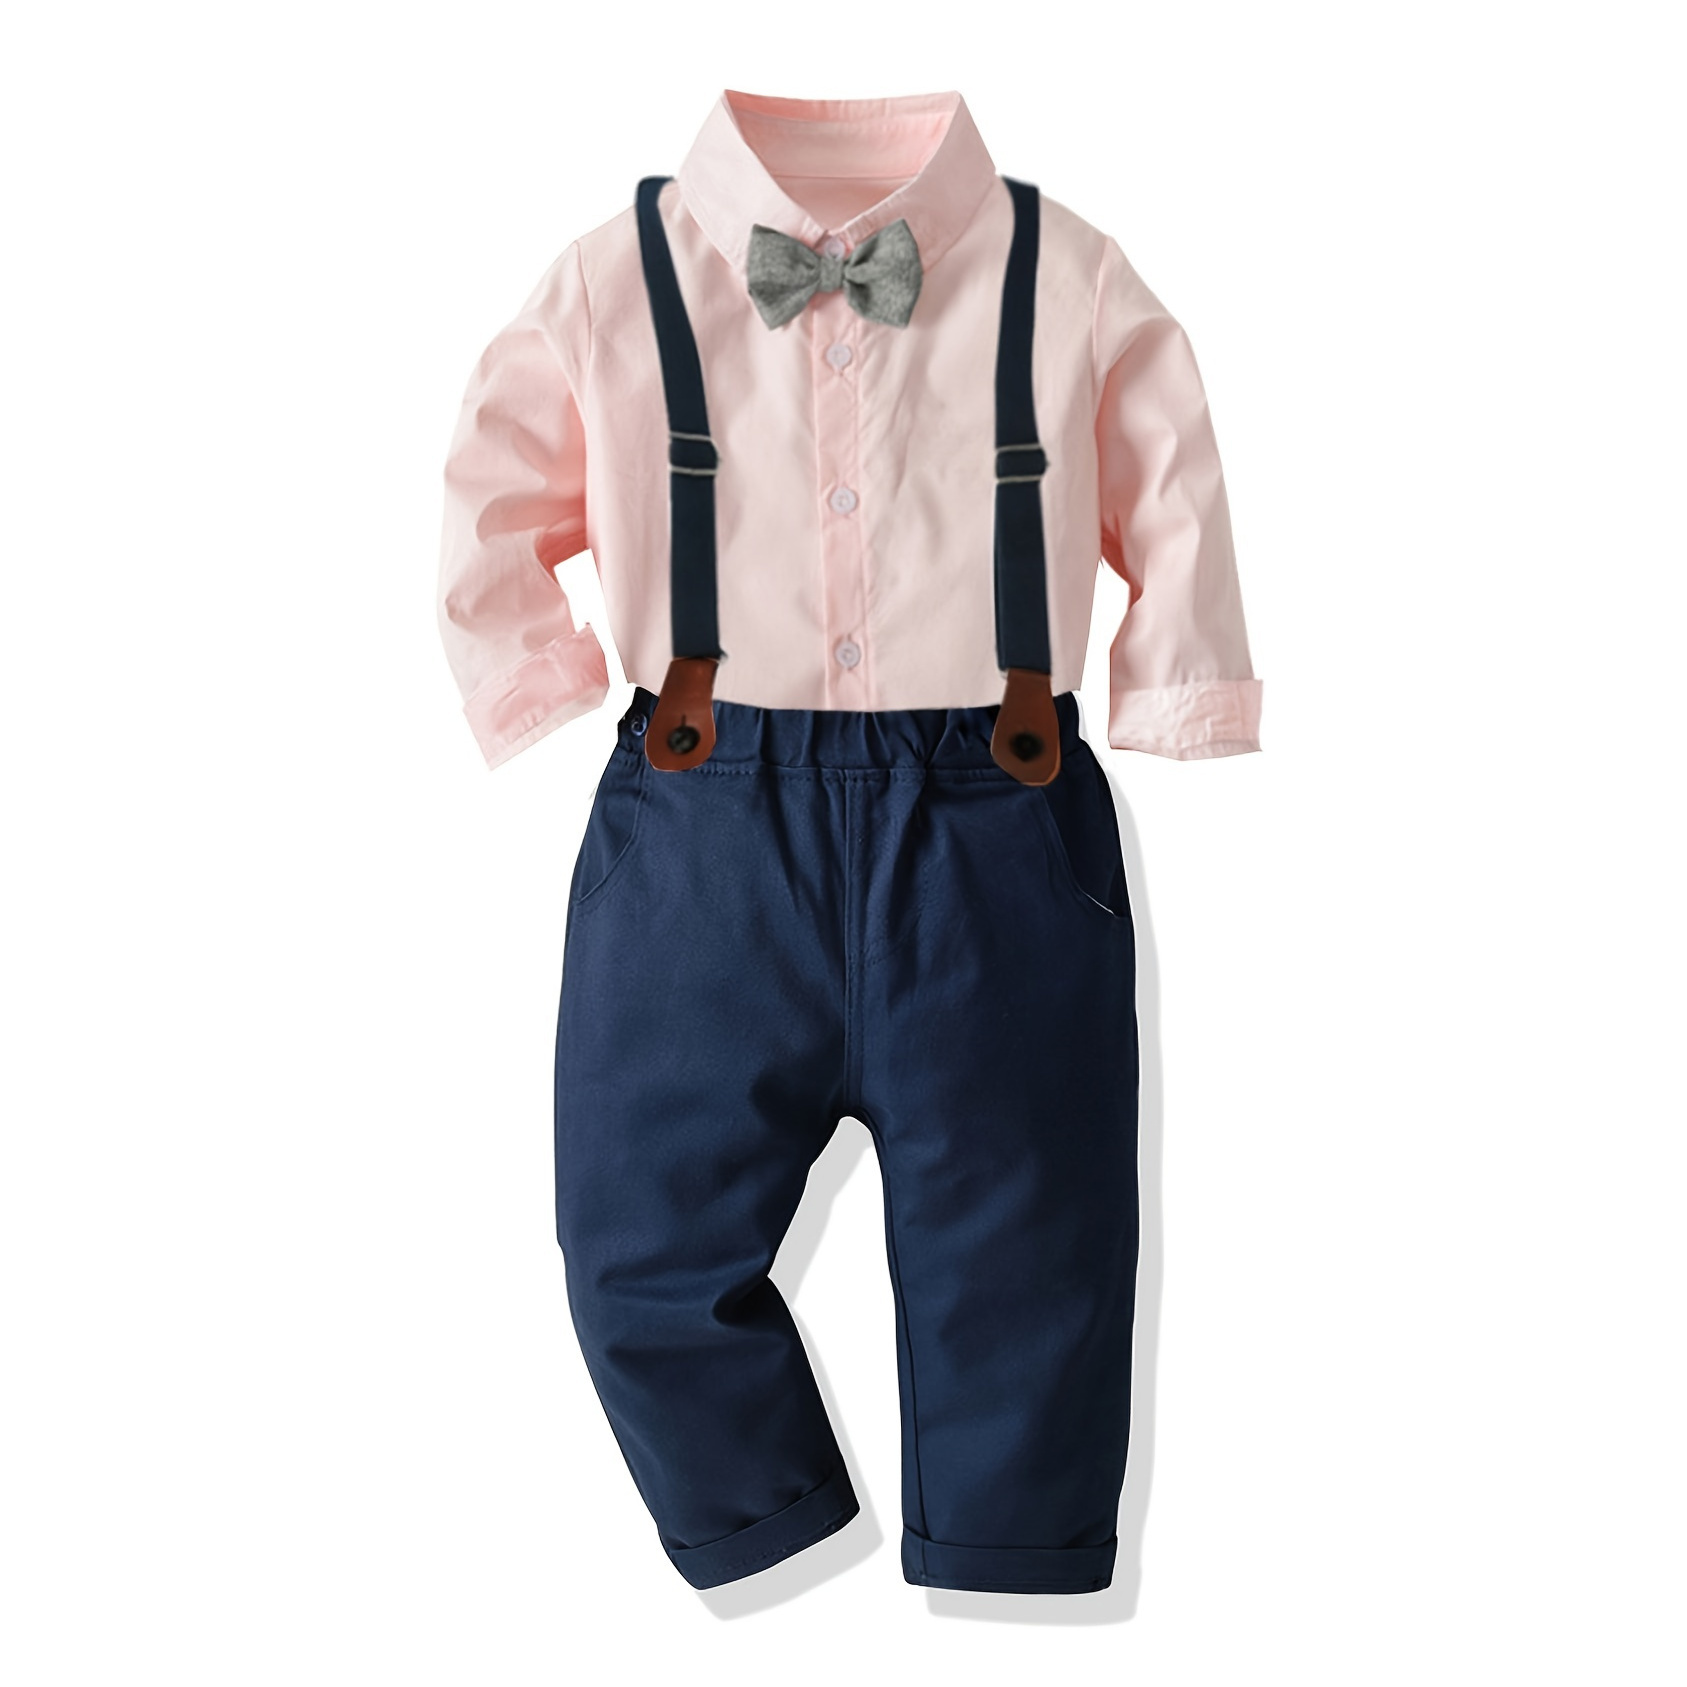 

Baby Boys Gentleman Outfit Formal Suit Long Sleeve Striped Plaid Shirt Suspender Pants Bow Tie Overalls Clothes Set